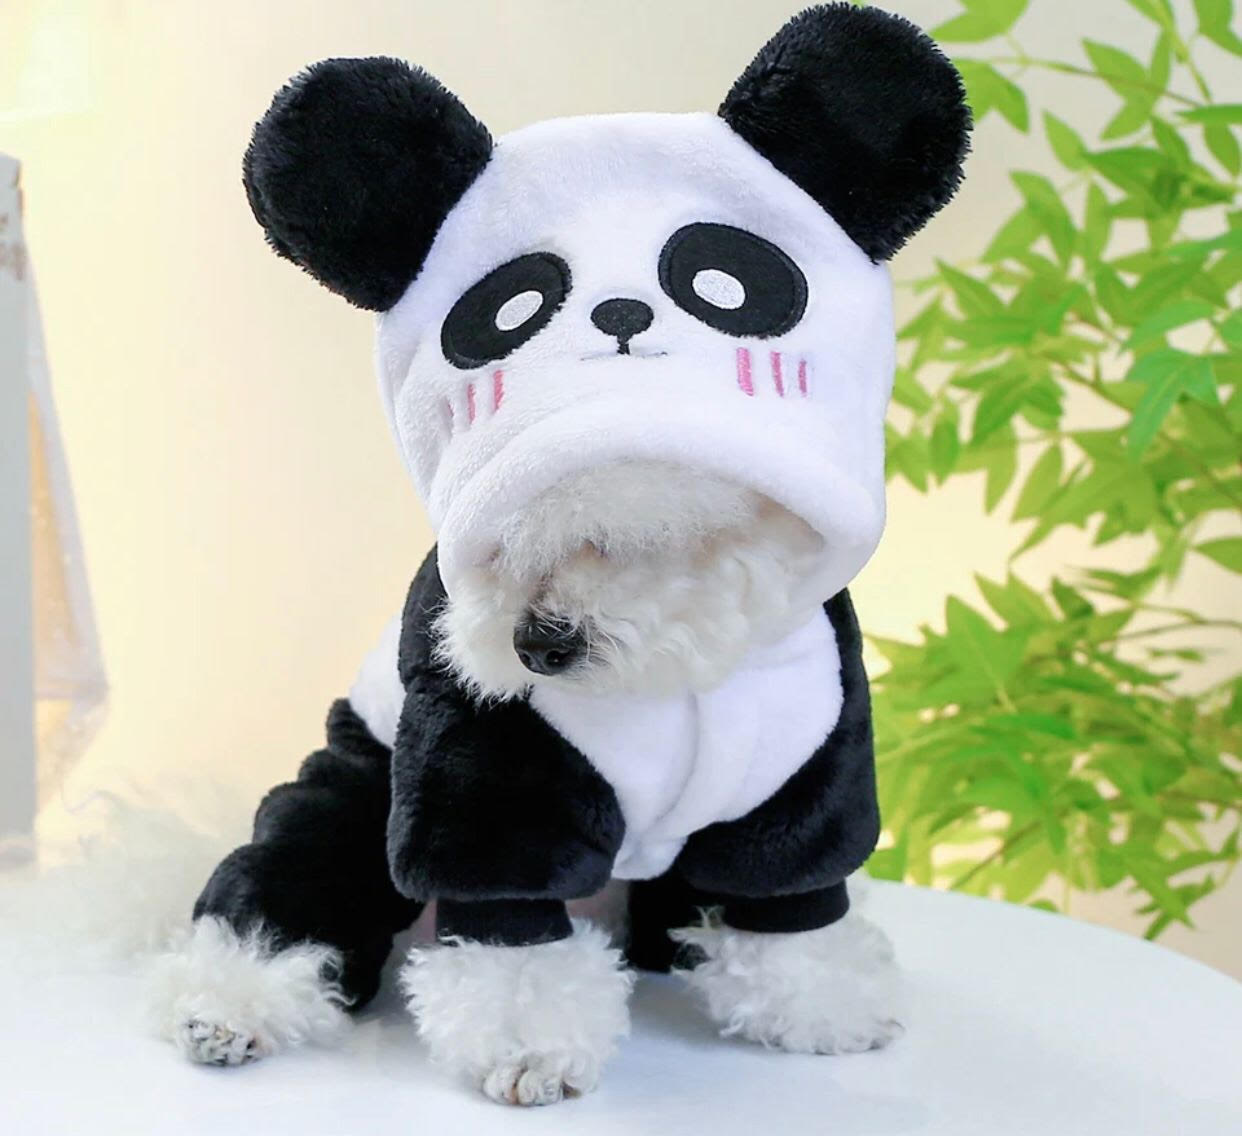 Panda outfit in Black and White with animal hood